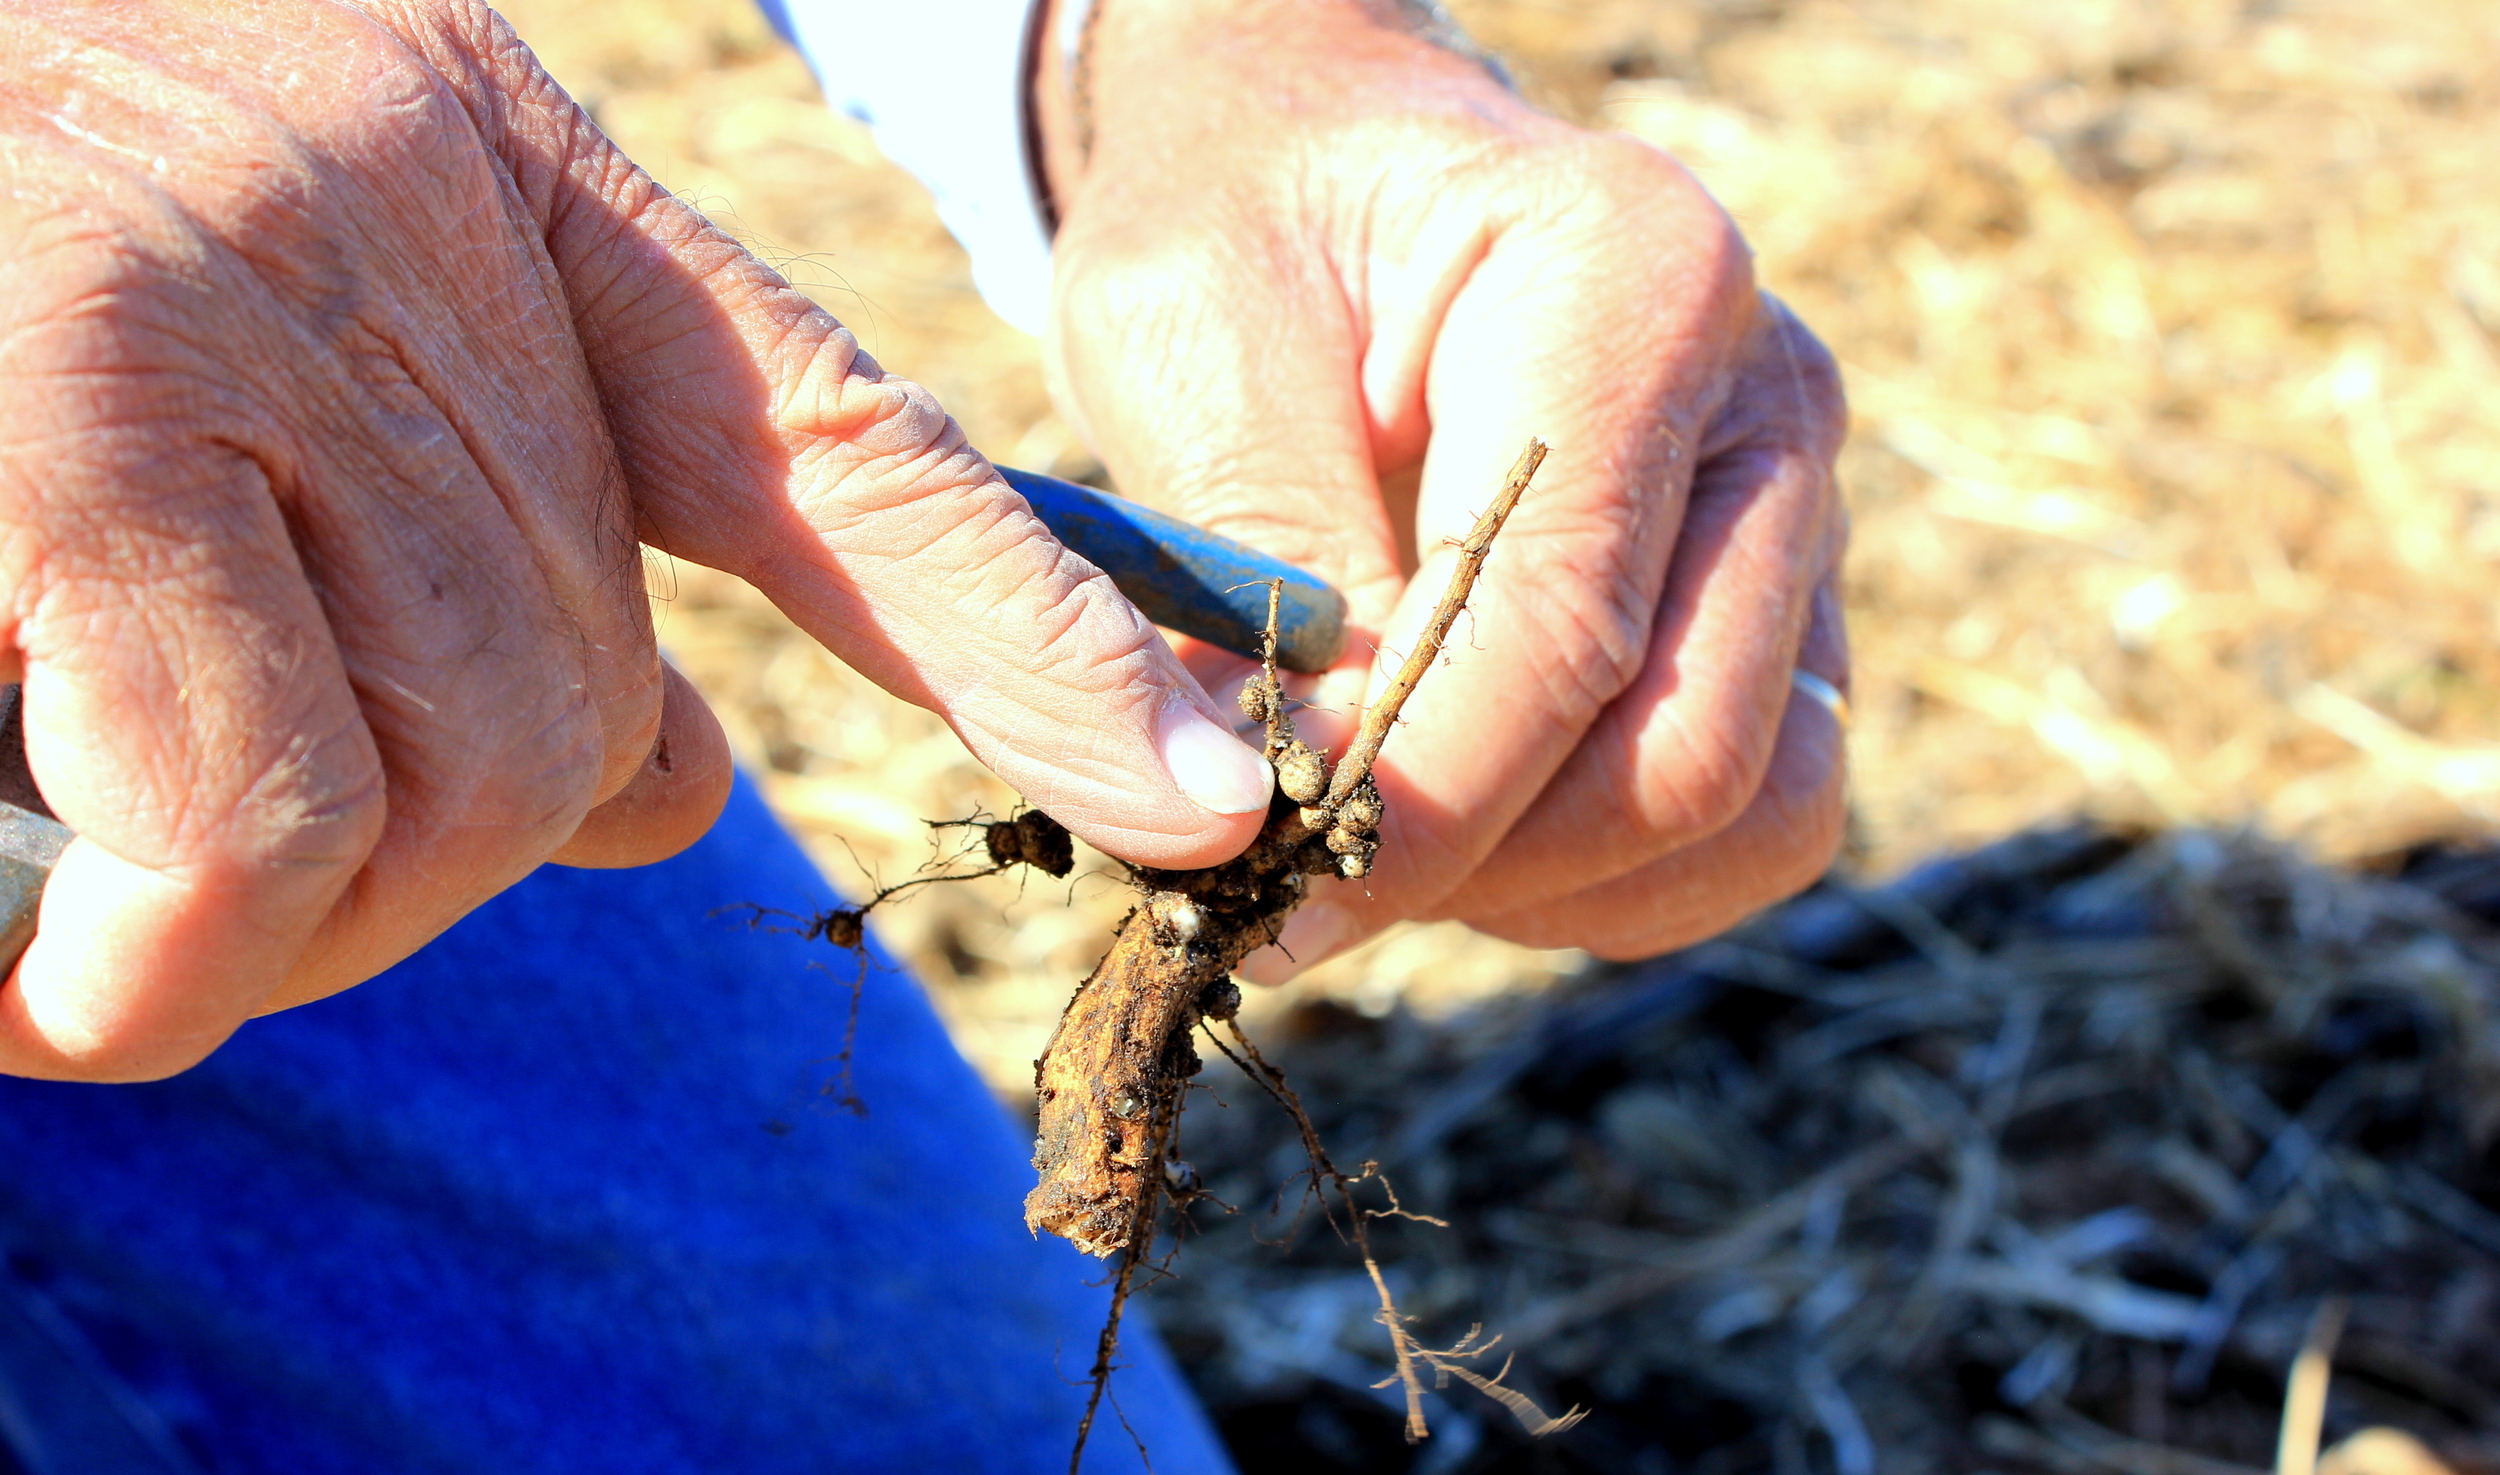 Dad showing off the nodules of the rhizobium bacteria on the root of a soybean plant